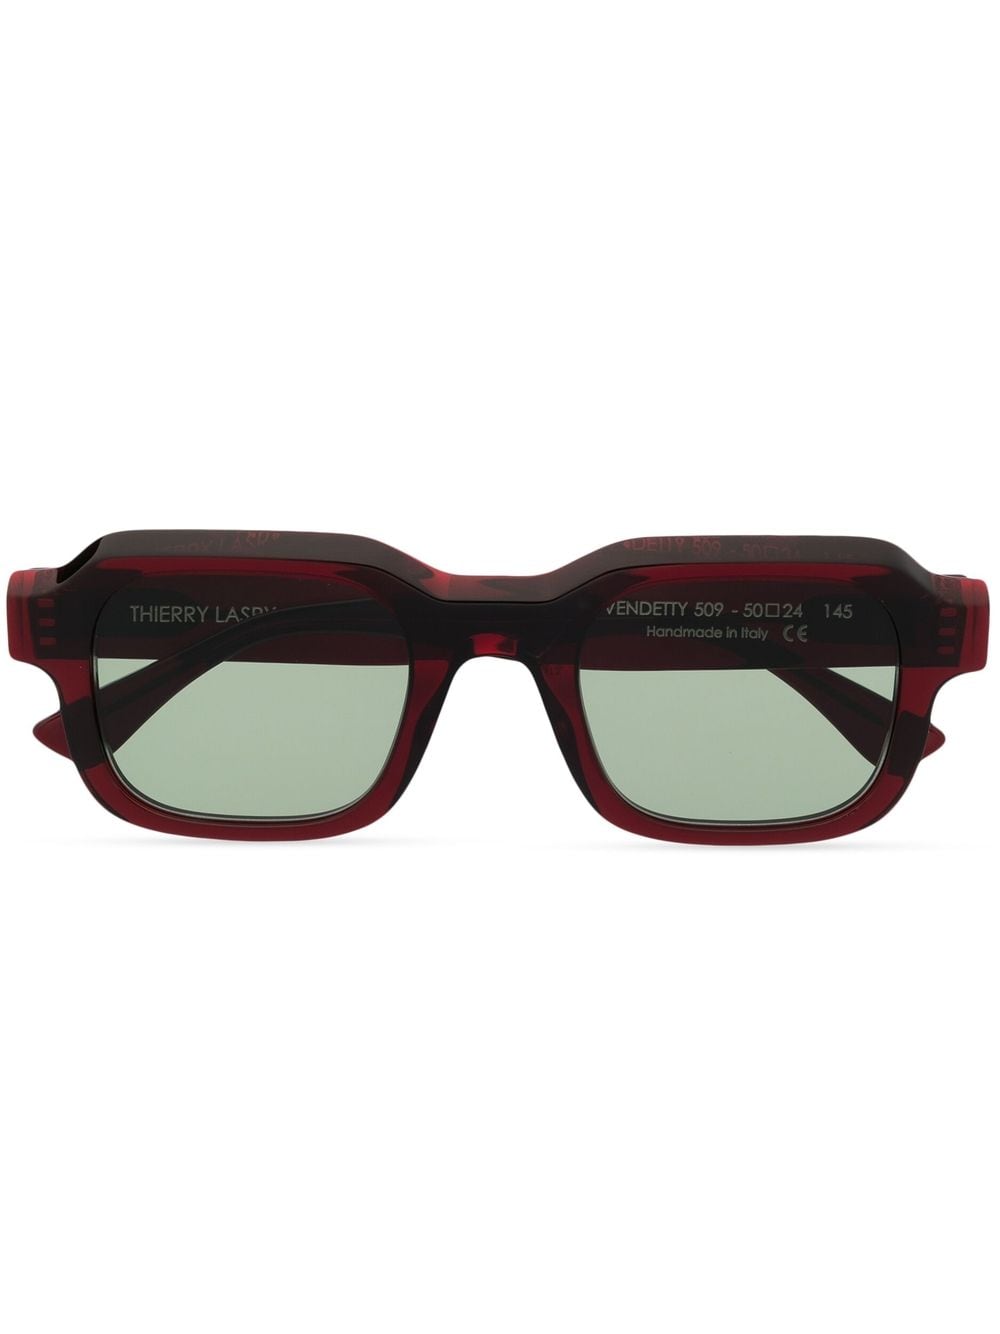 Thierry Lasry Vendetty square-frame sunglasses - Red von Thierry Lasry